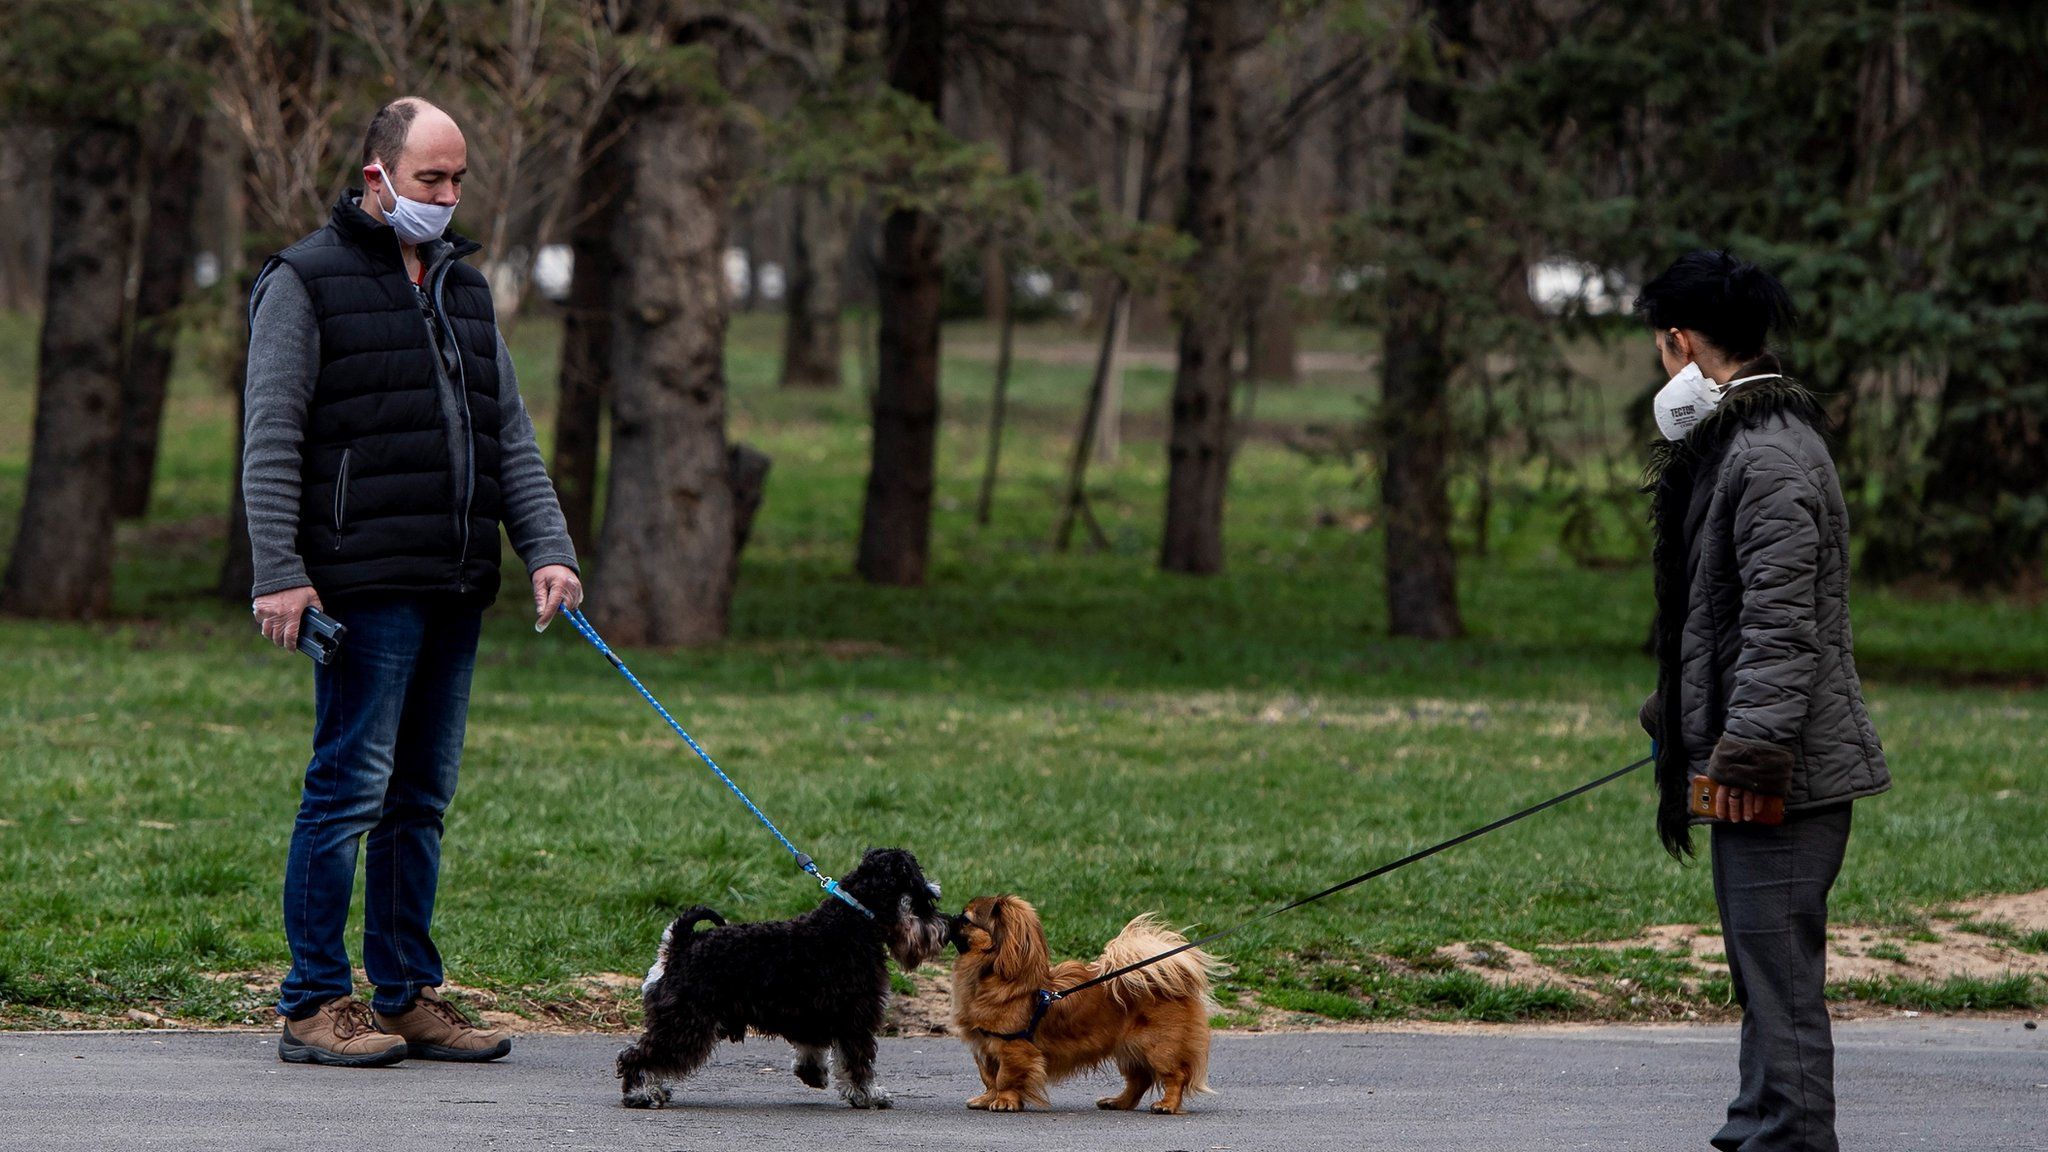 People walk their dogs in an empty park in Sofia, Bulgaria on 22 March 2020